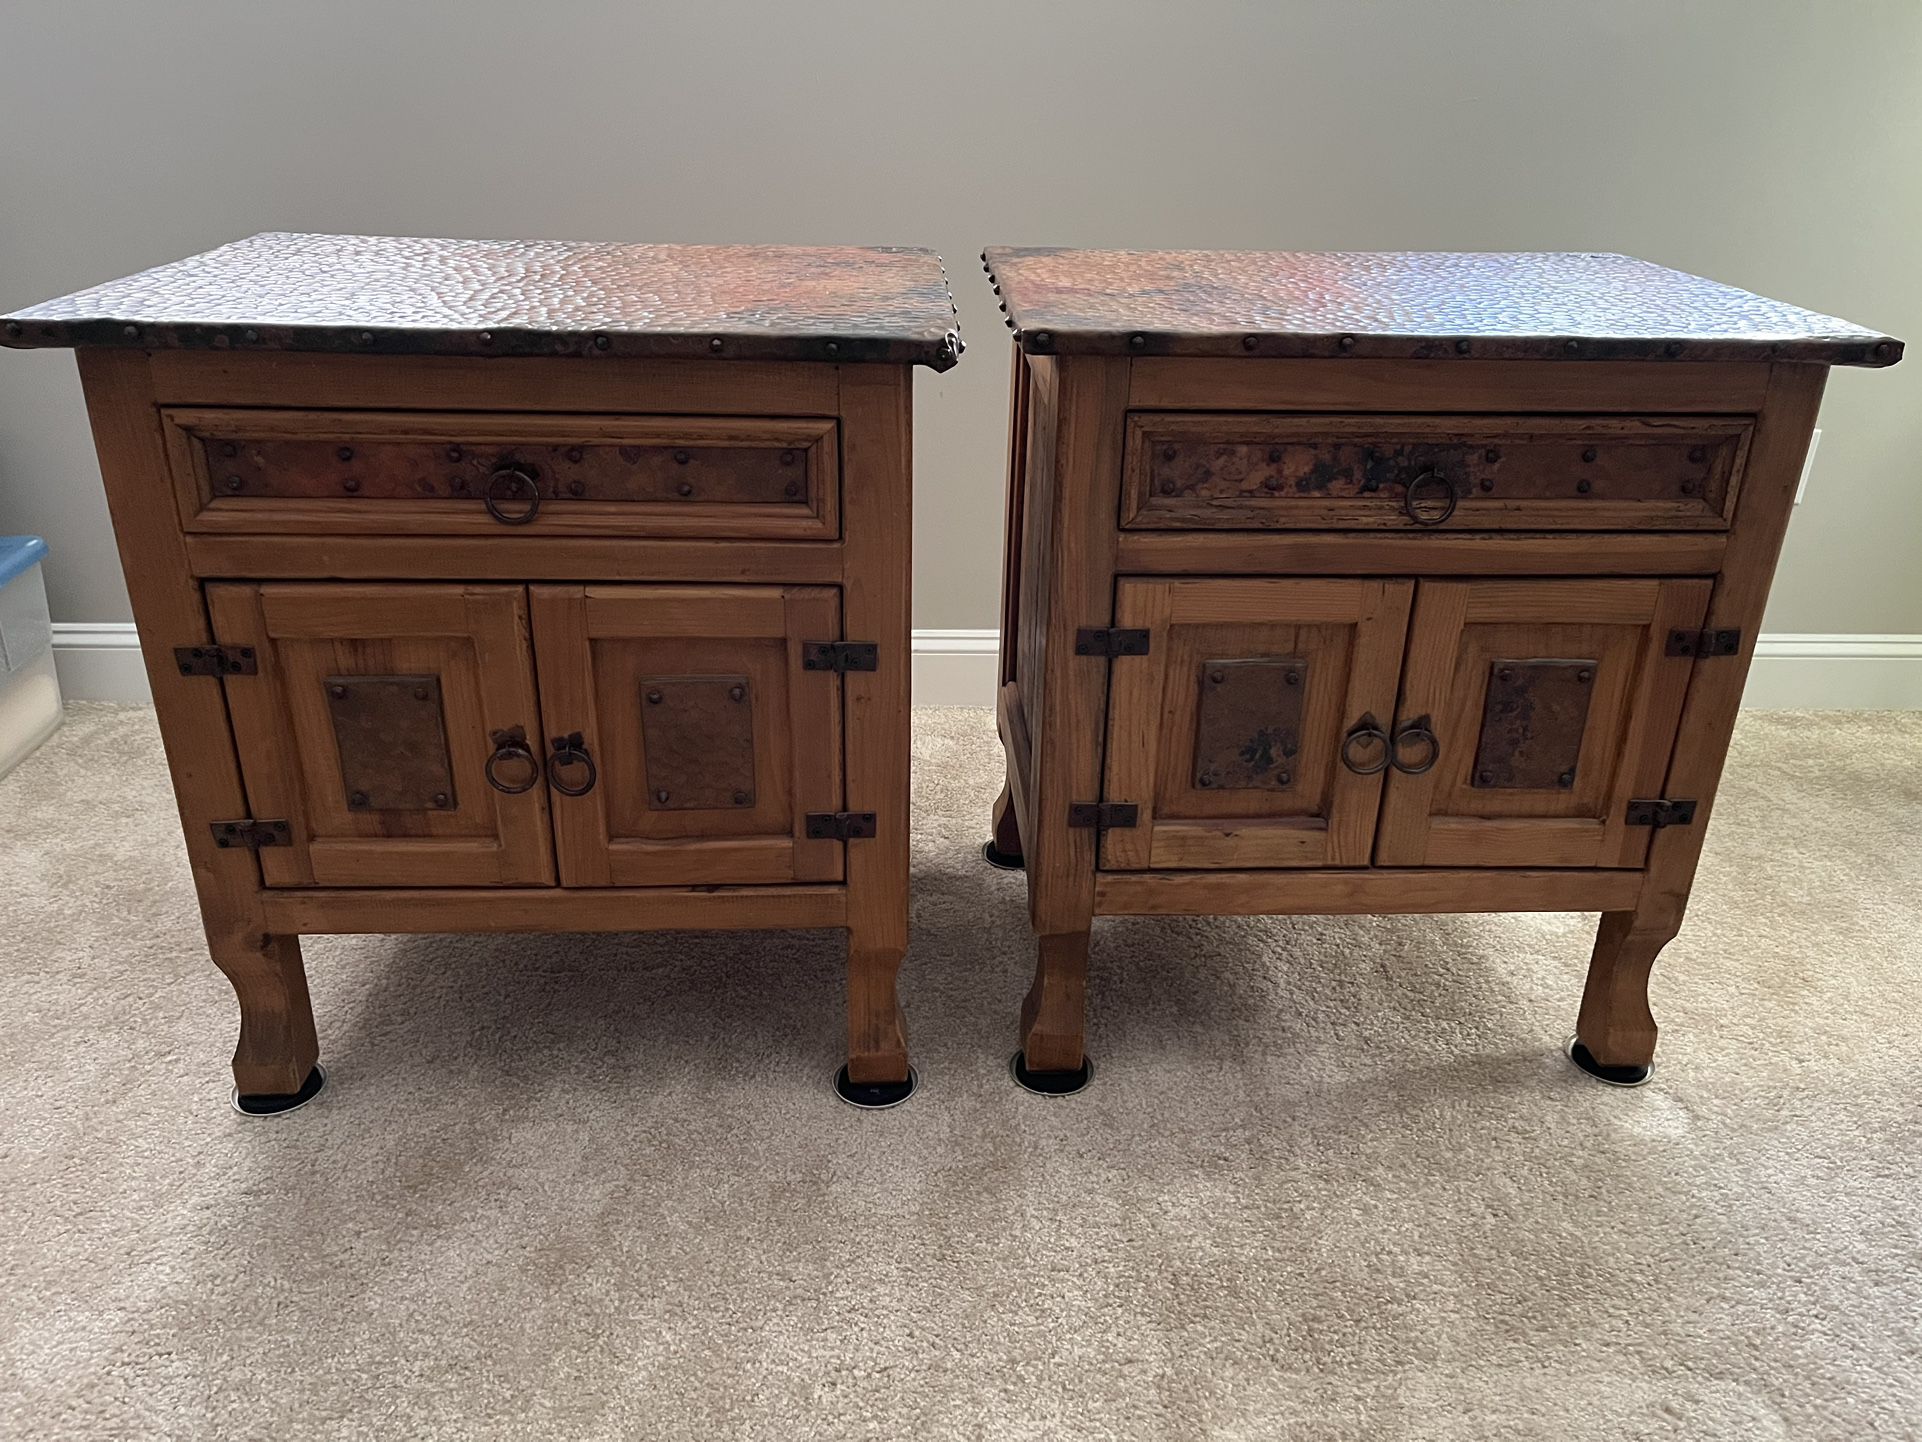 Nightstands / End Tables Hand-Hammered Copper Top and Wood